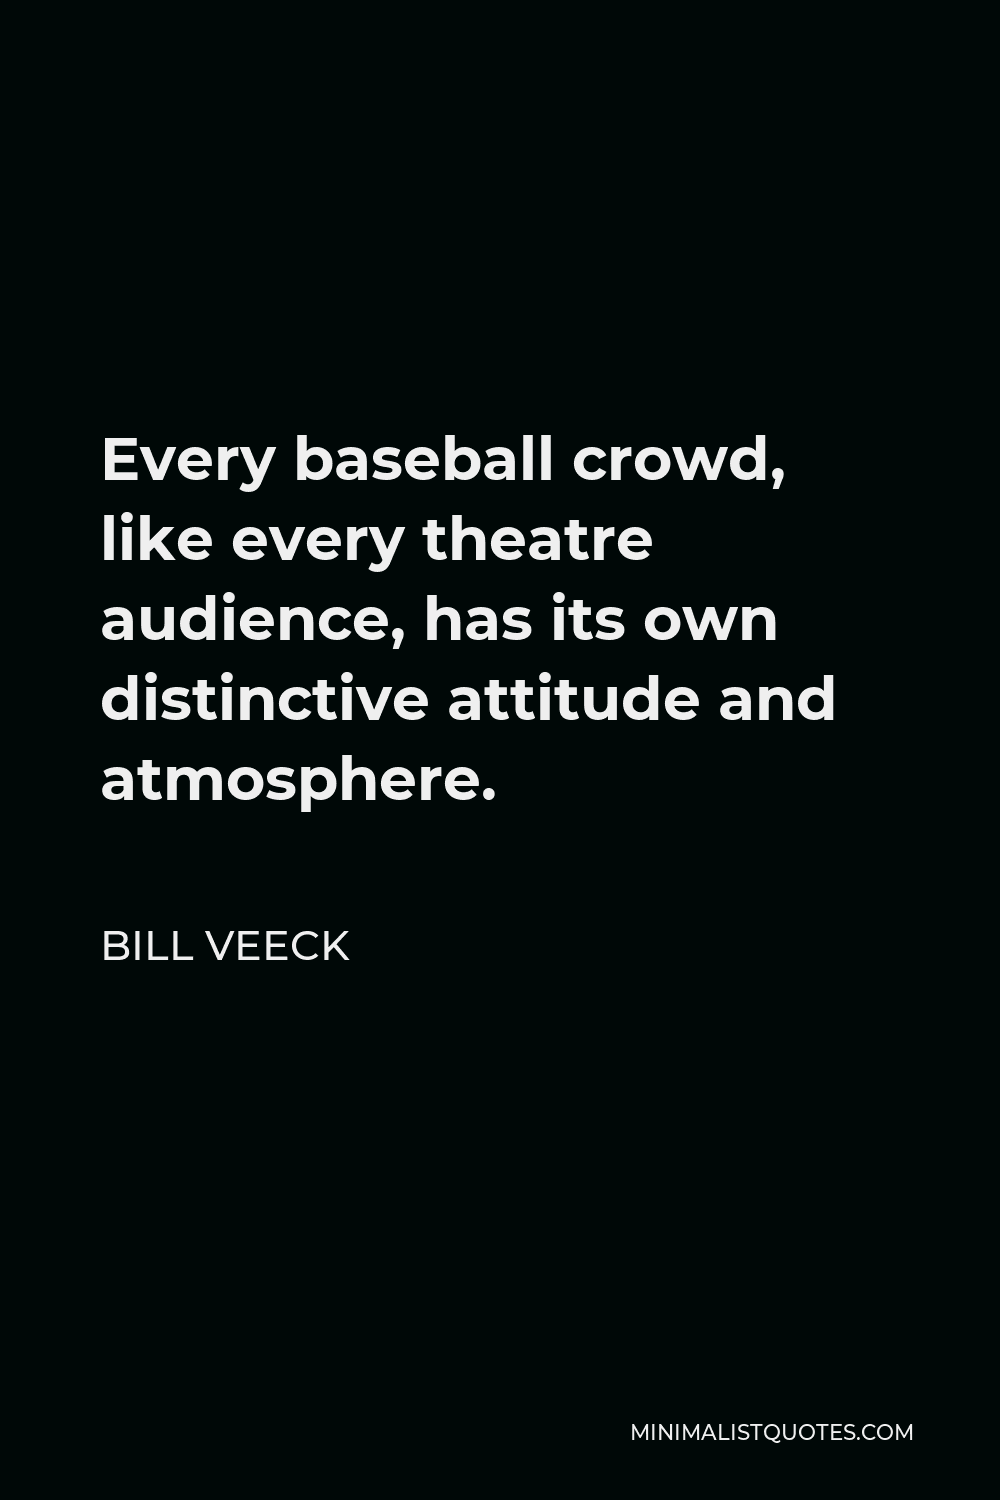 Bill Veeck Quote - Every baseball crowd, like every theatre audience, has its own distinctive attitude and atmosphere.